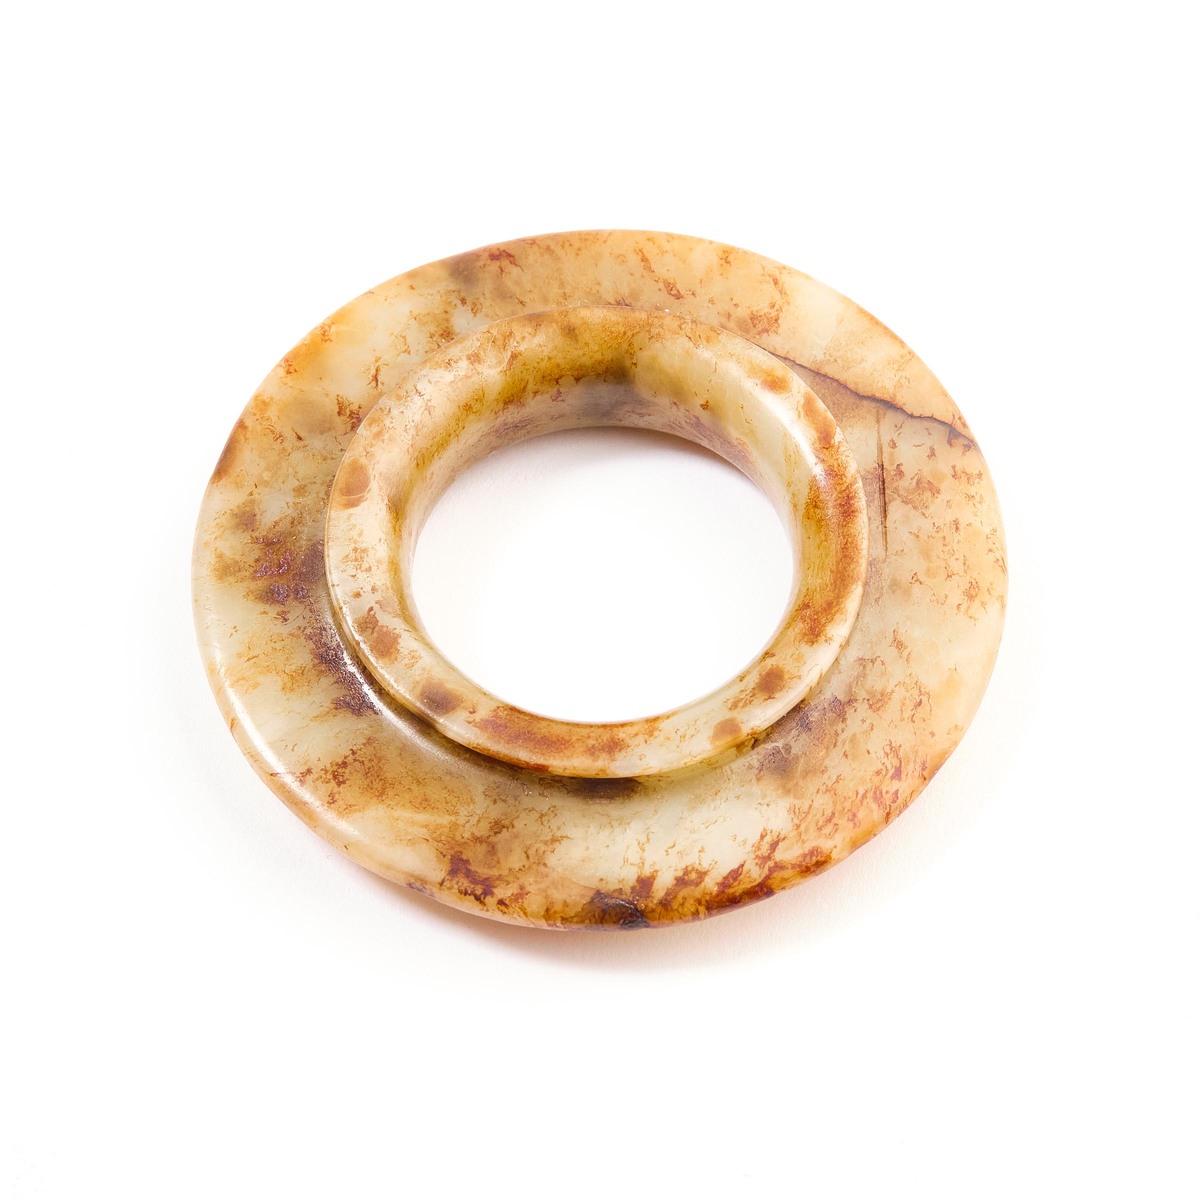 A White and Russet Jade Ring-Shaped Ornament, Song-Ming Dynasty (960-1644), 宋/明 白玉带皮凸唇环, diameter 2. - Image 4 of 7